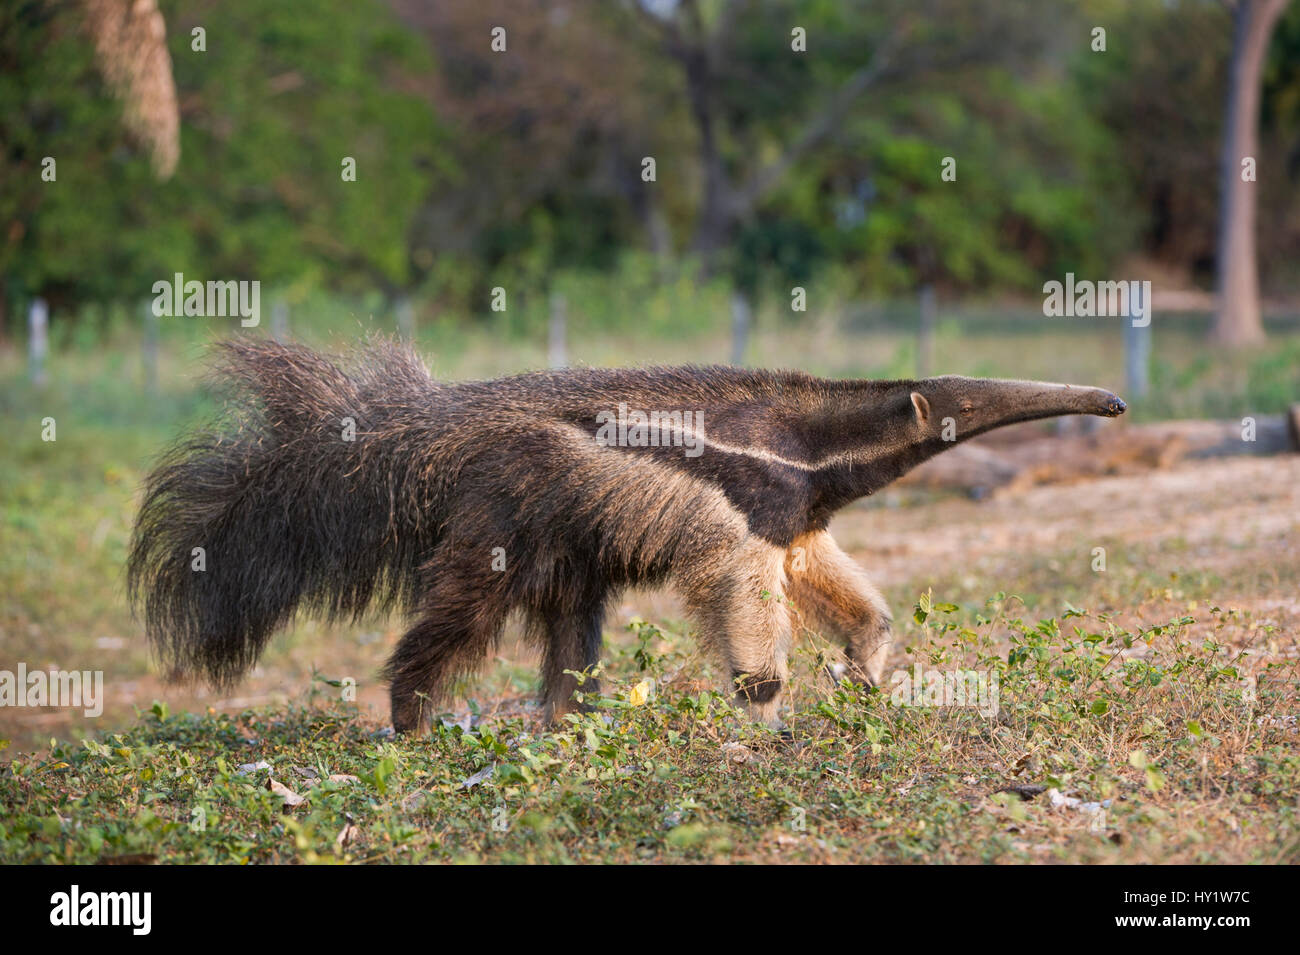 Adult Giant Anteater (Myrmecophaga tridactyla) foraging, Northern Pantanal, Moto Grosso State, Brazil, South America. Stock Photo